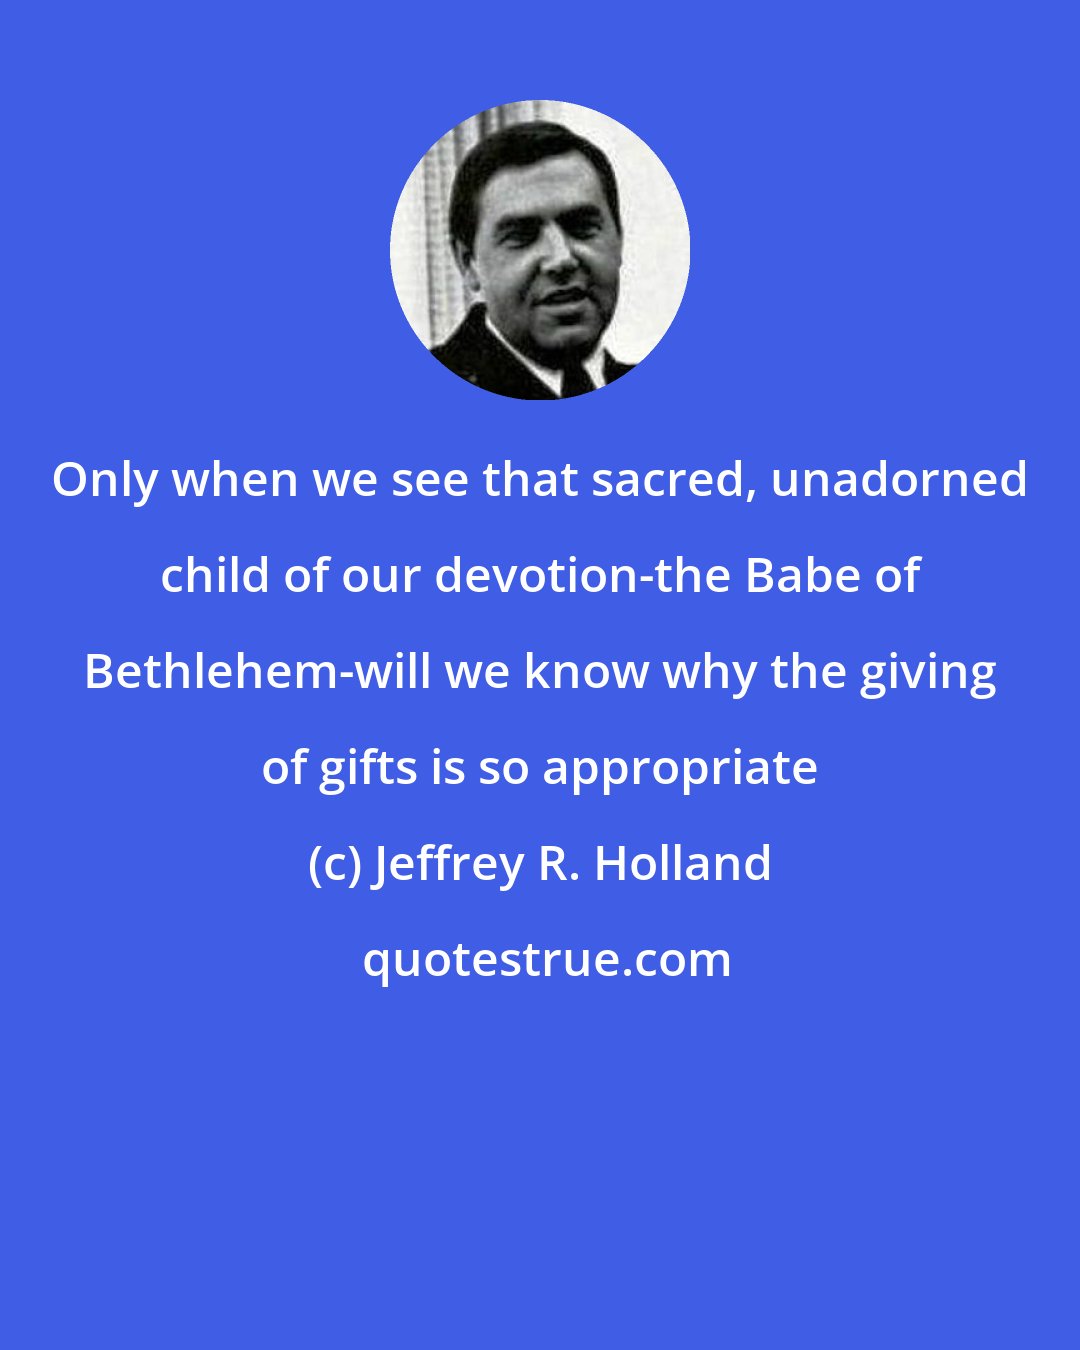 Jeffrey R. Holland: Only when we see that sacred, unadorned child of our devotion-the Babe of Bethlehem-will we know why the giving of gifts is so appropriate